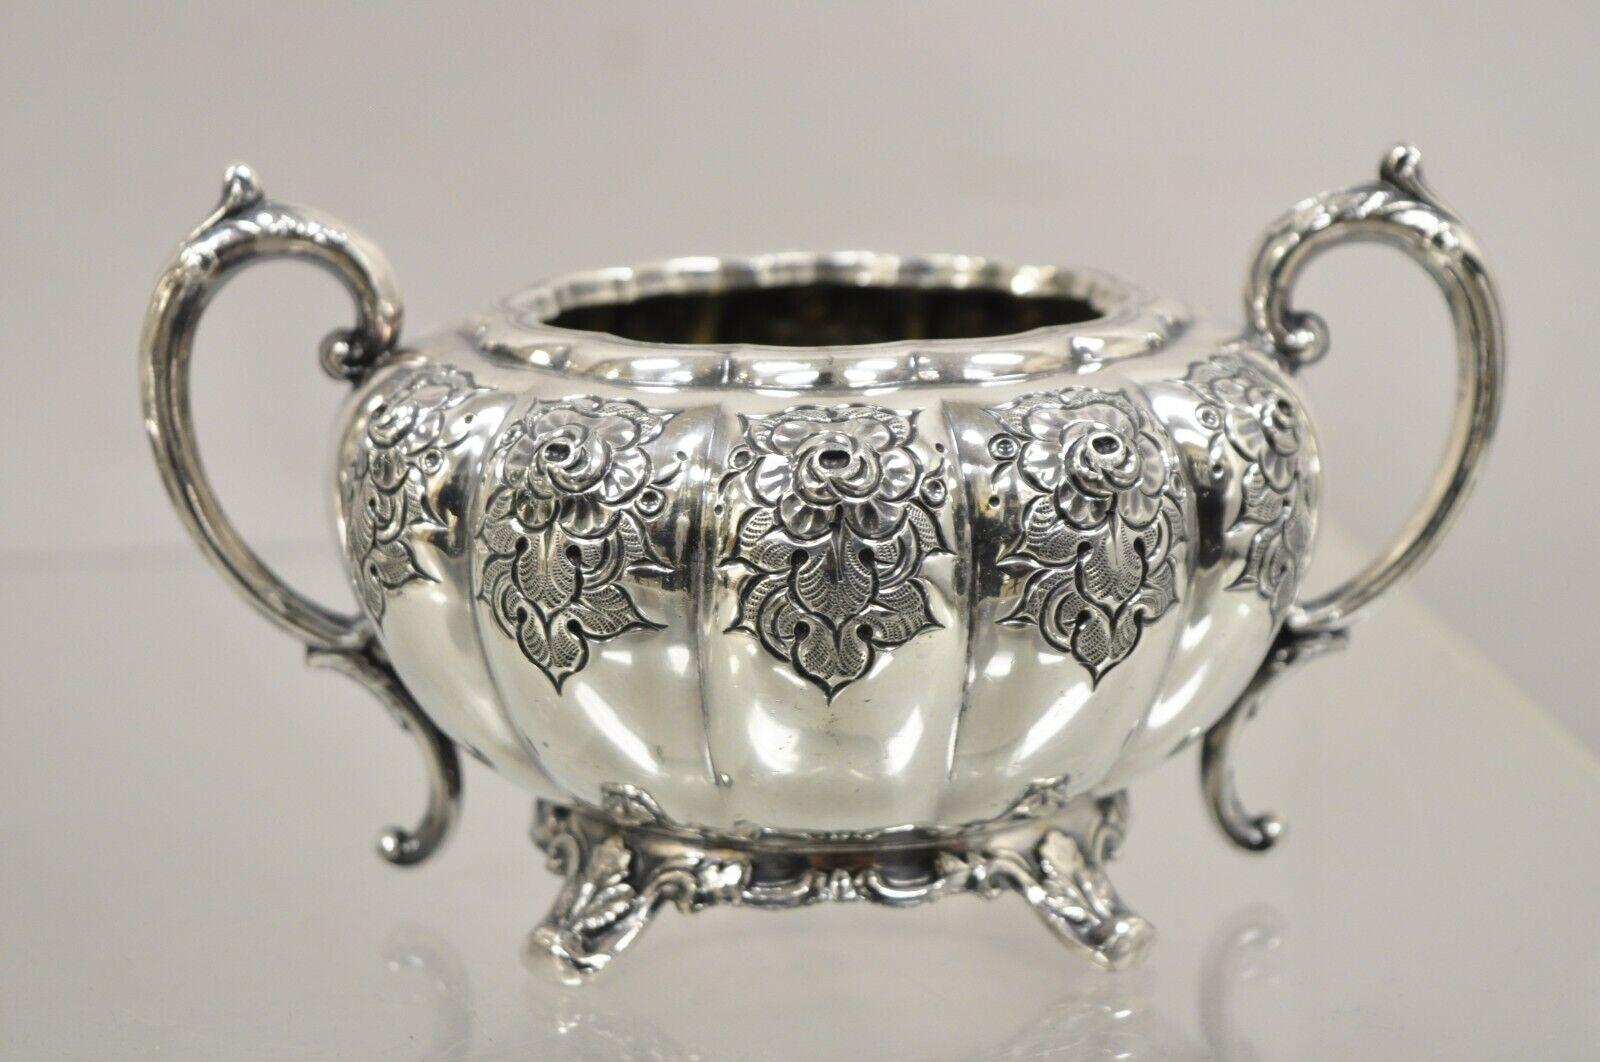 Vintage Victorian 1881 Rogers Canada Silver Plated Sugar Bowl and Creamer Set For Sale 1